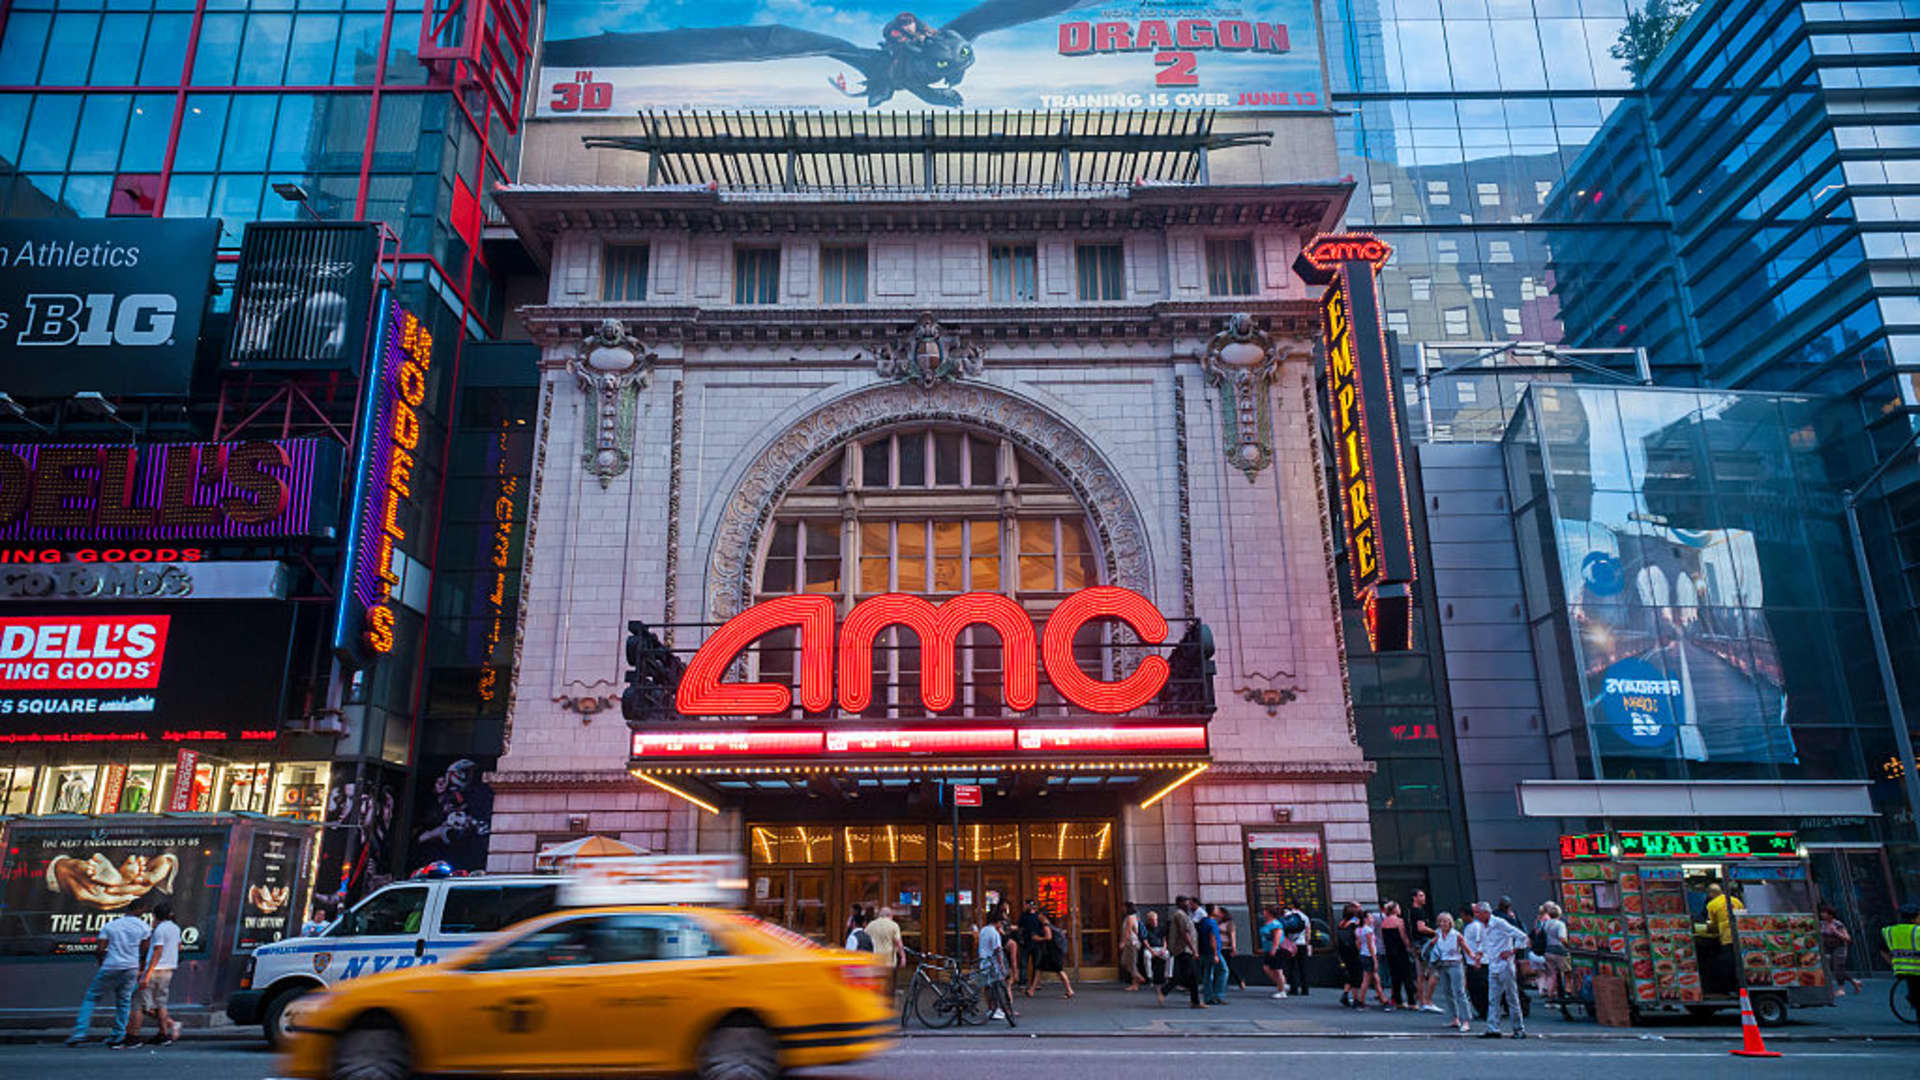 AMC plans to issue 517 million shares of preferred stock, under the ticker symbol ‘APE’